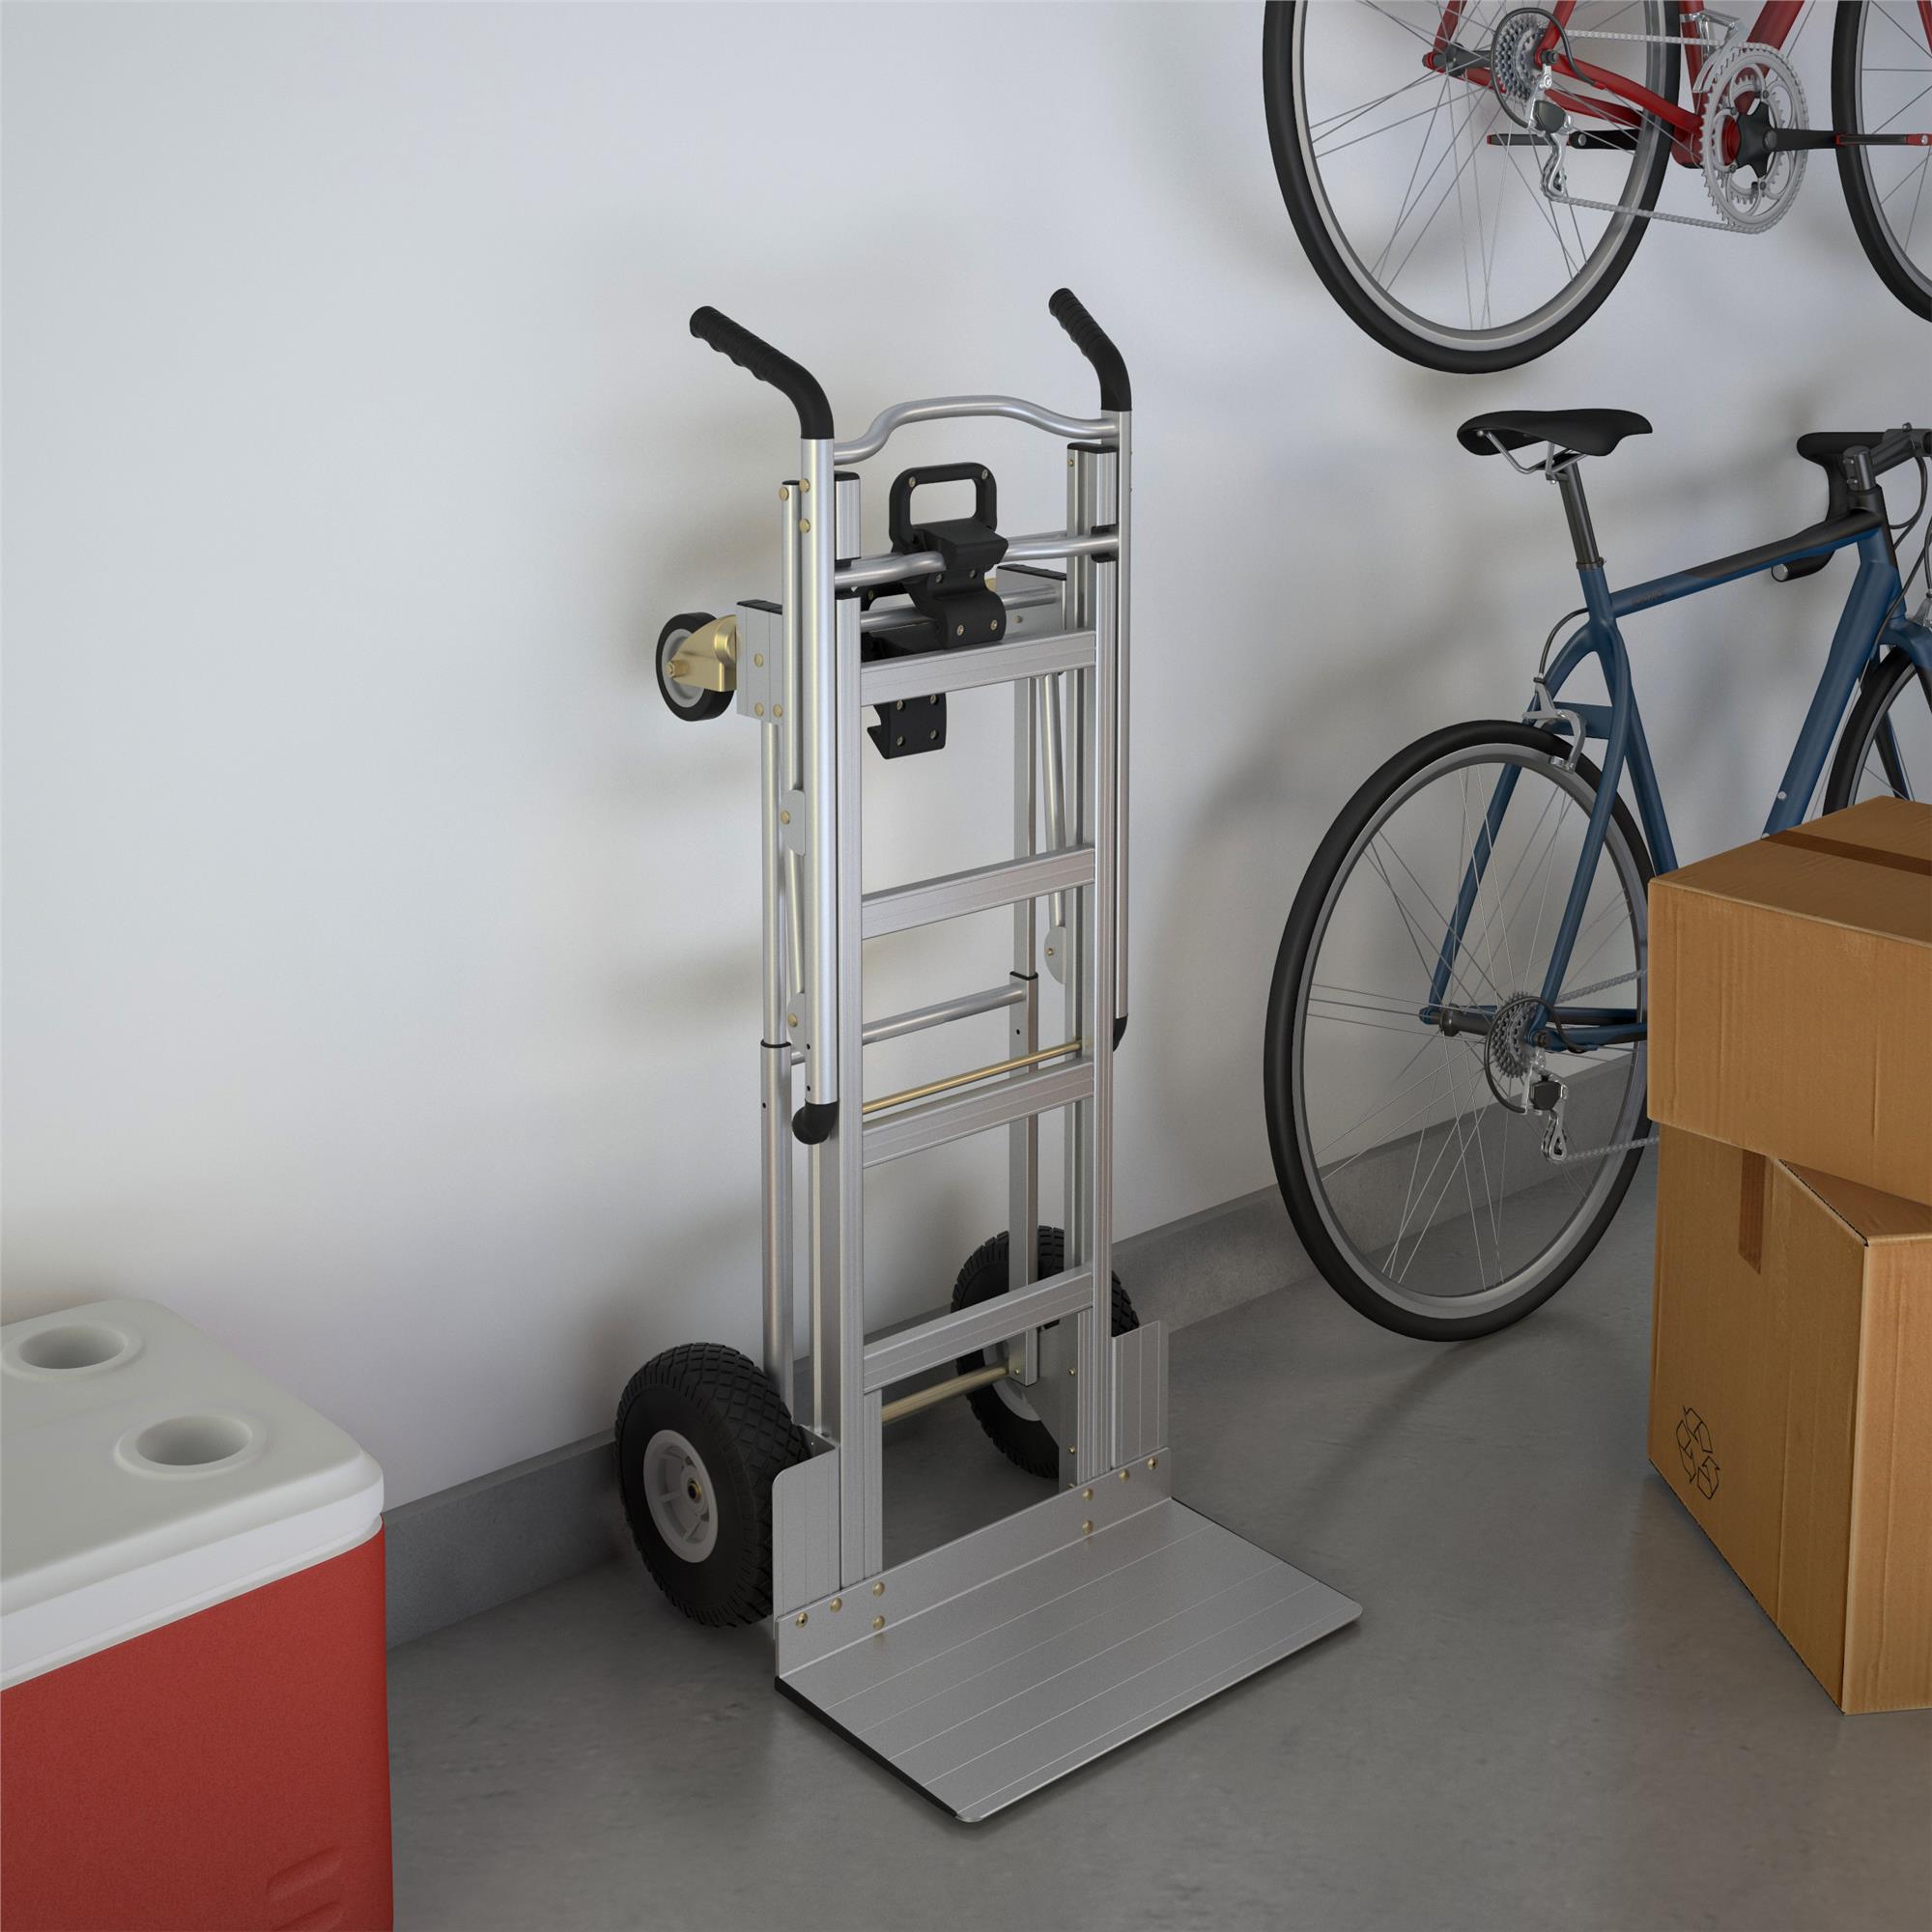 Cosco 3-in-1 Assist Series Aluminum Hand Truck/Assisted Hand Truck/Cart w/ flat free wheels, Silver - image 2 of 16